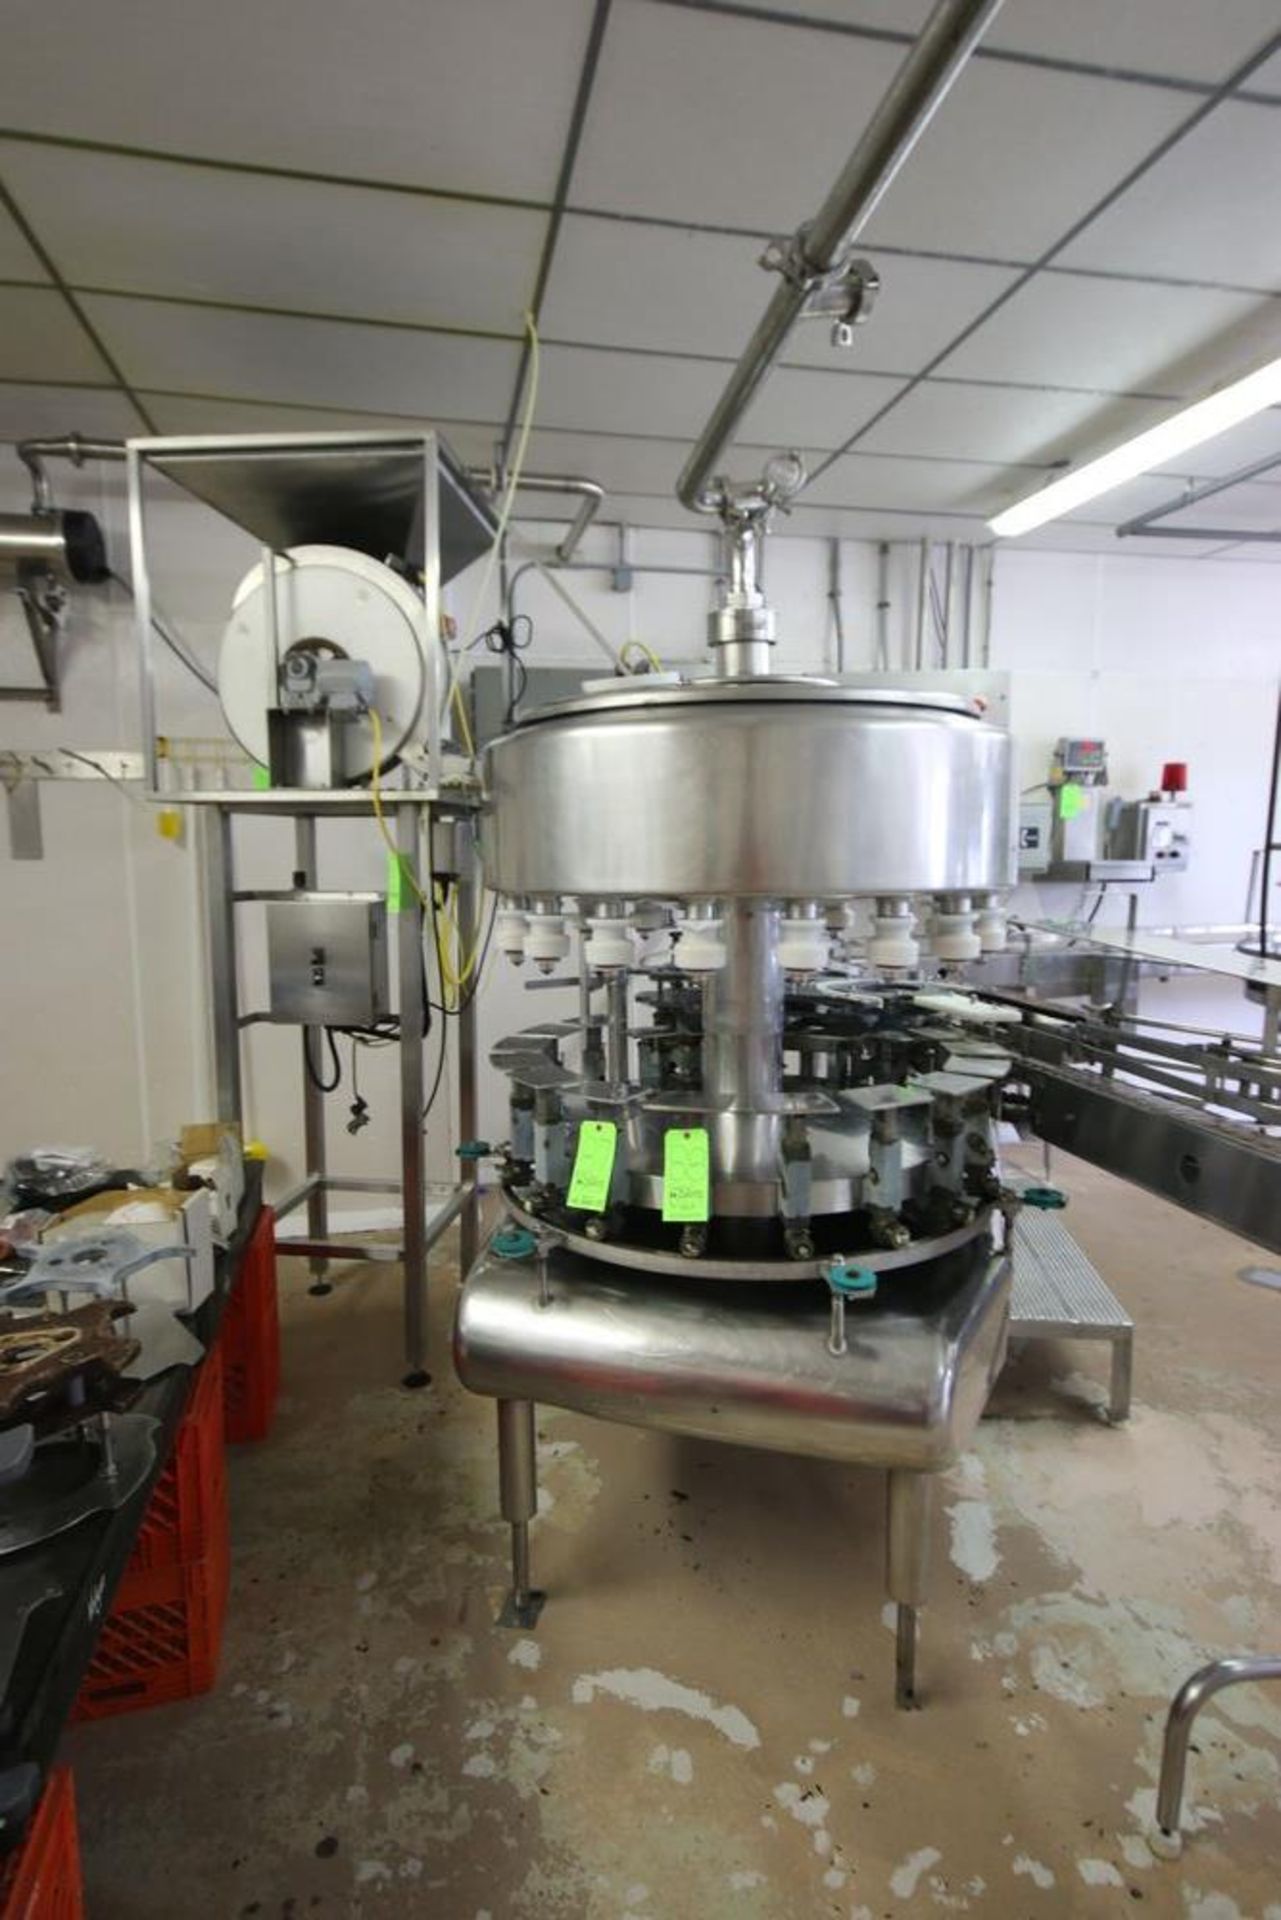 Federal 18-Valve Rotary Filler, with 5-Station Rotary Capper, with Stand Alone Capping Feed - Image 6 of 22